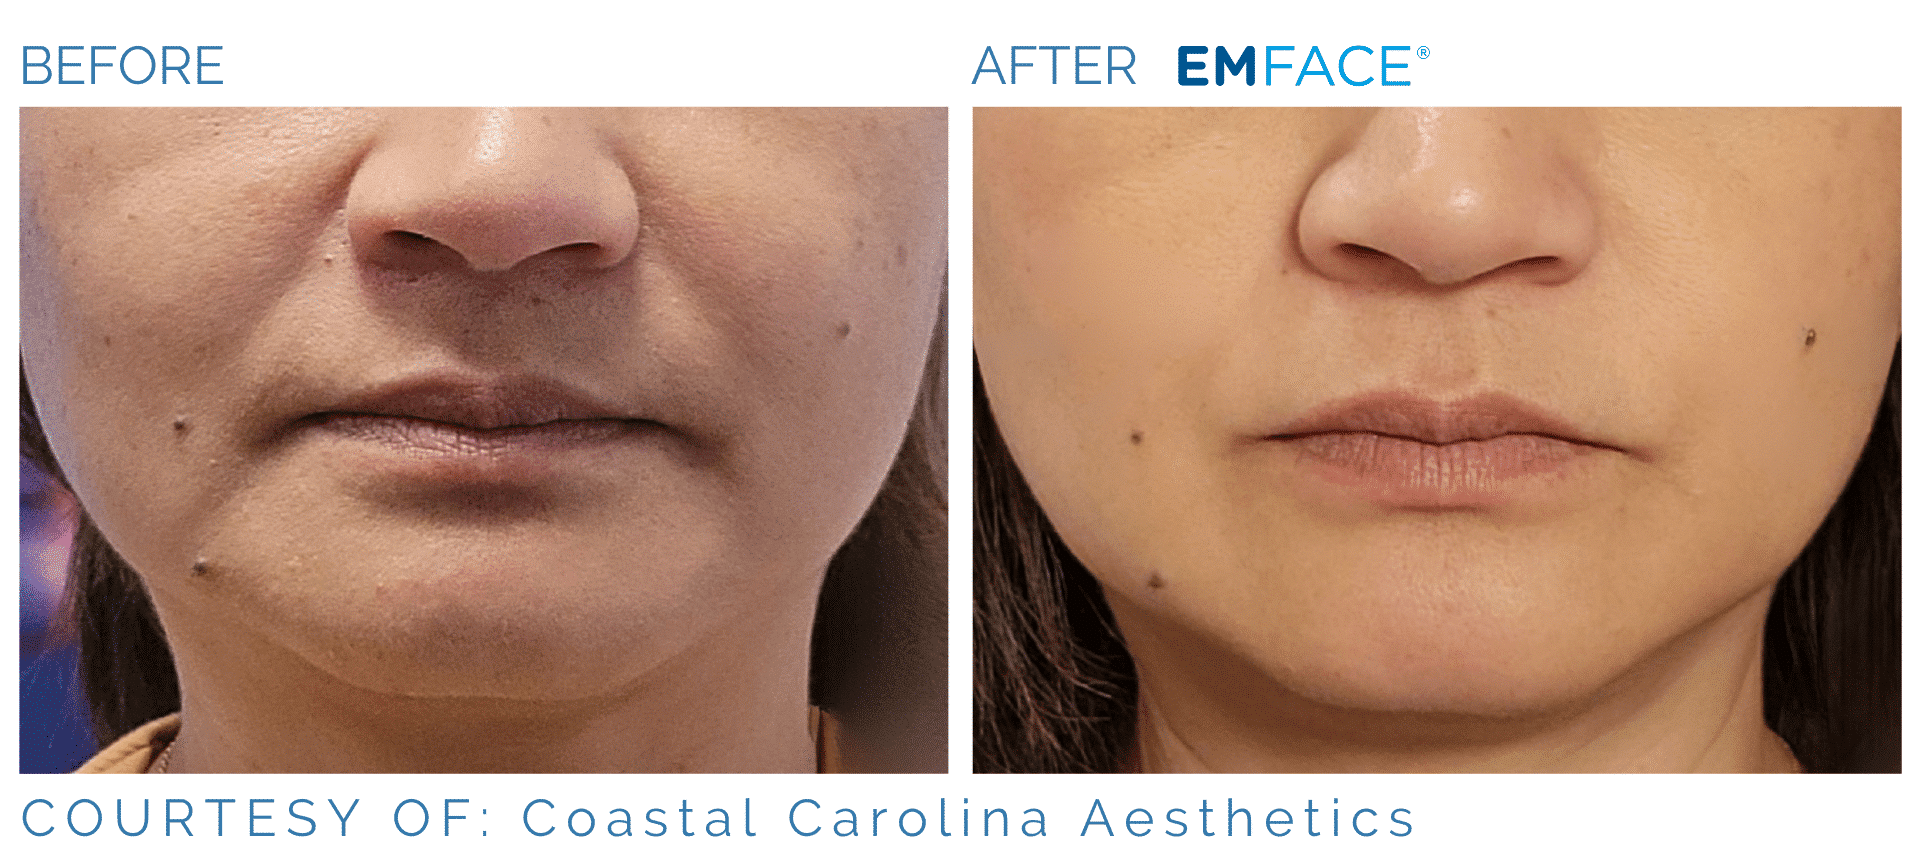 Emsculpt NEO Face Before and After Treament